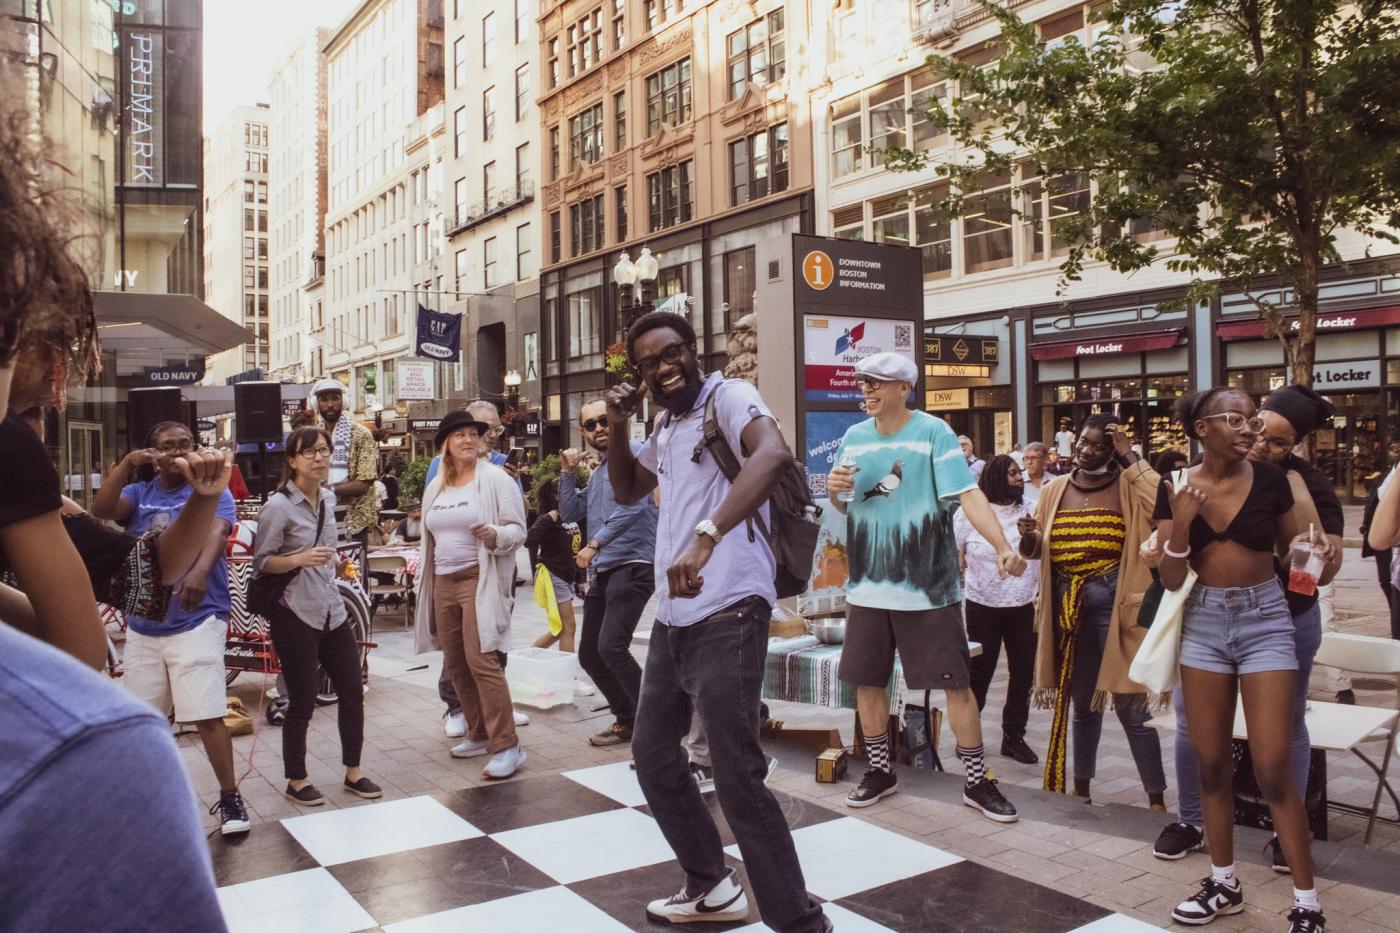 A crowd dances outside and, at the center of the crowd, a Black man with a short fro and a backpack smiles wide.